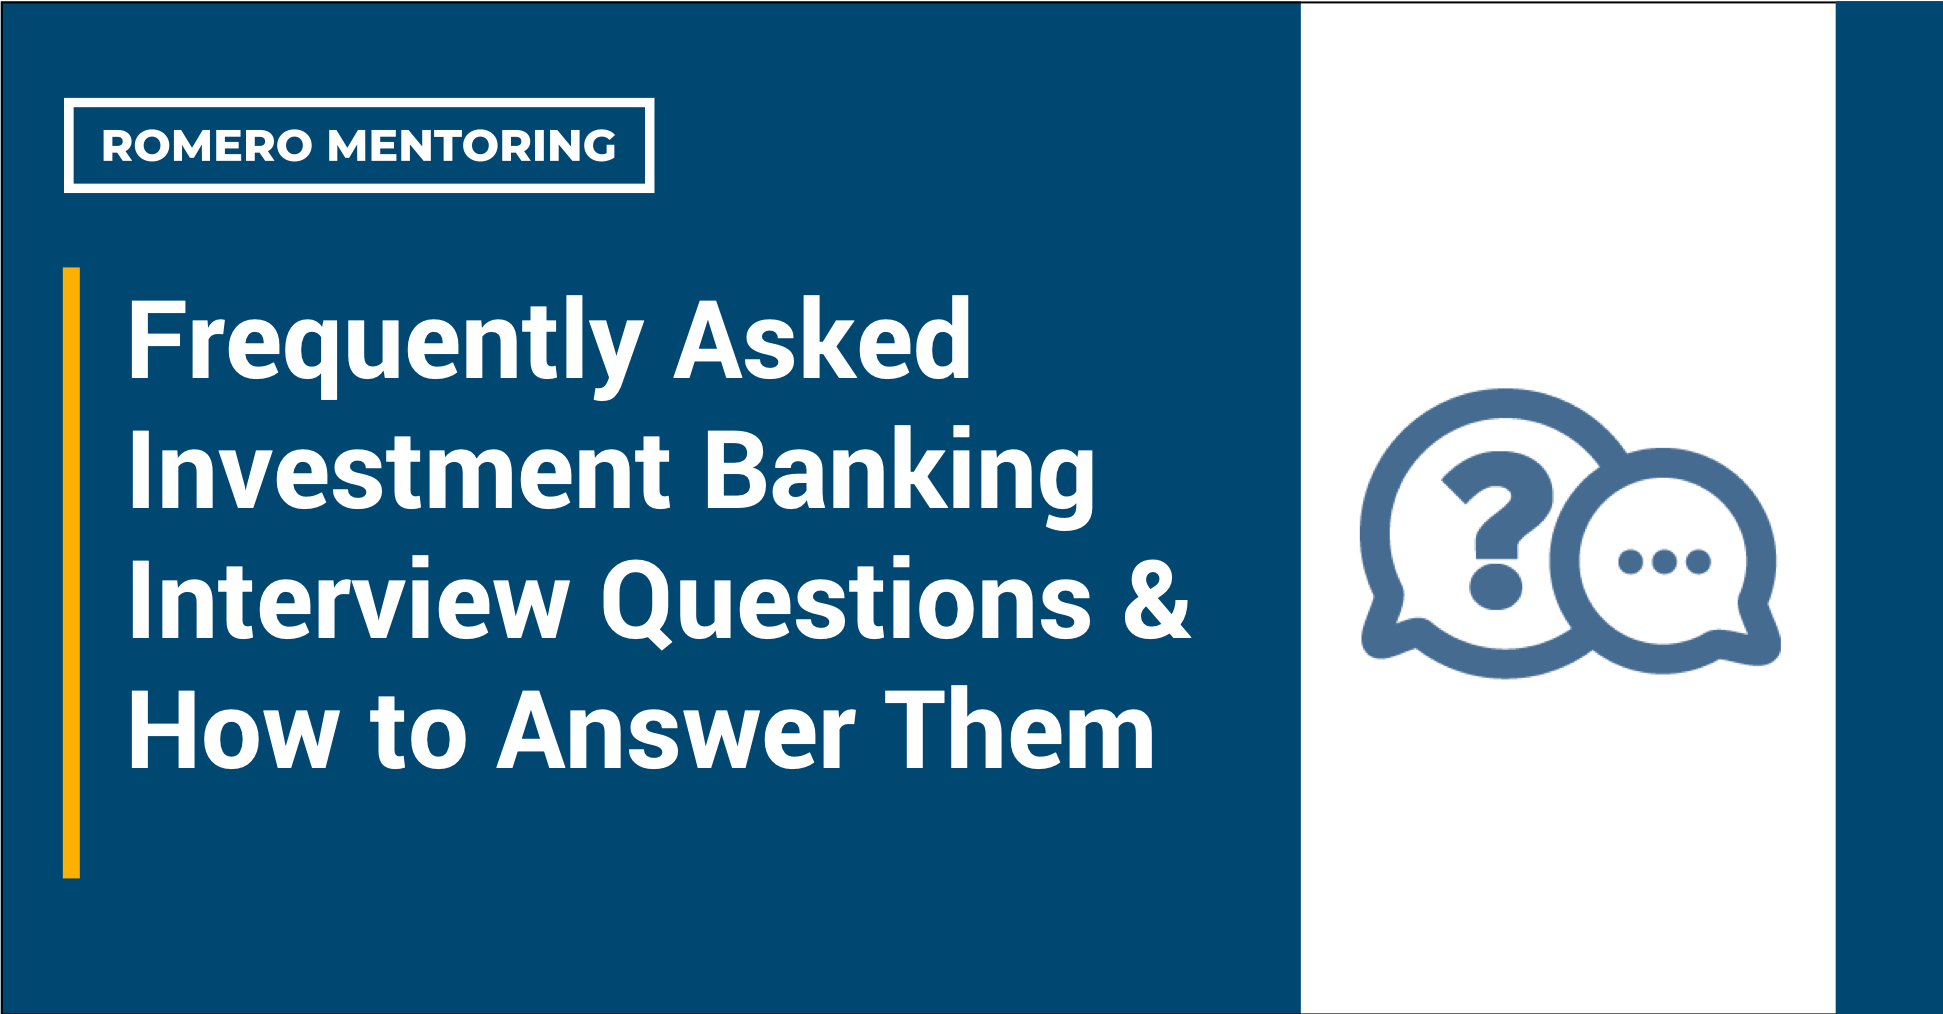 Frequently Asked Investment Banking Interview Questions & How to Answer Them